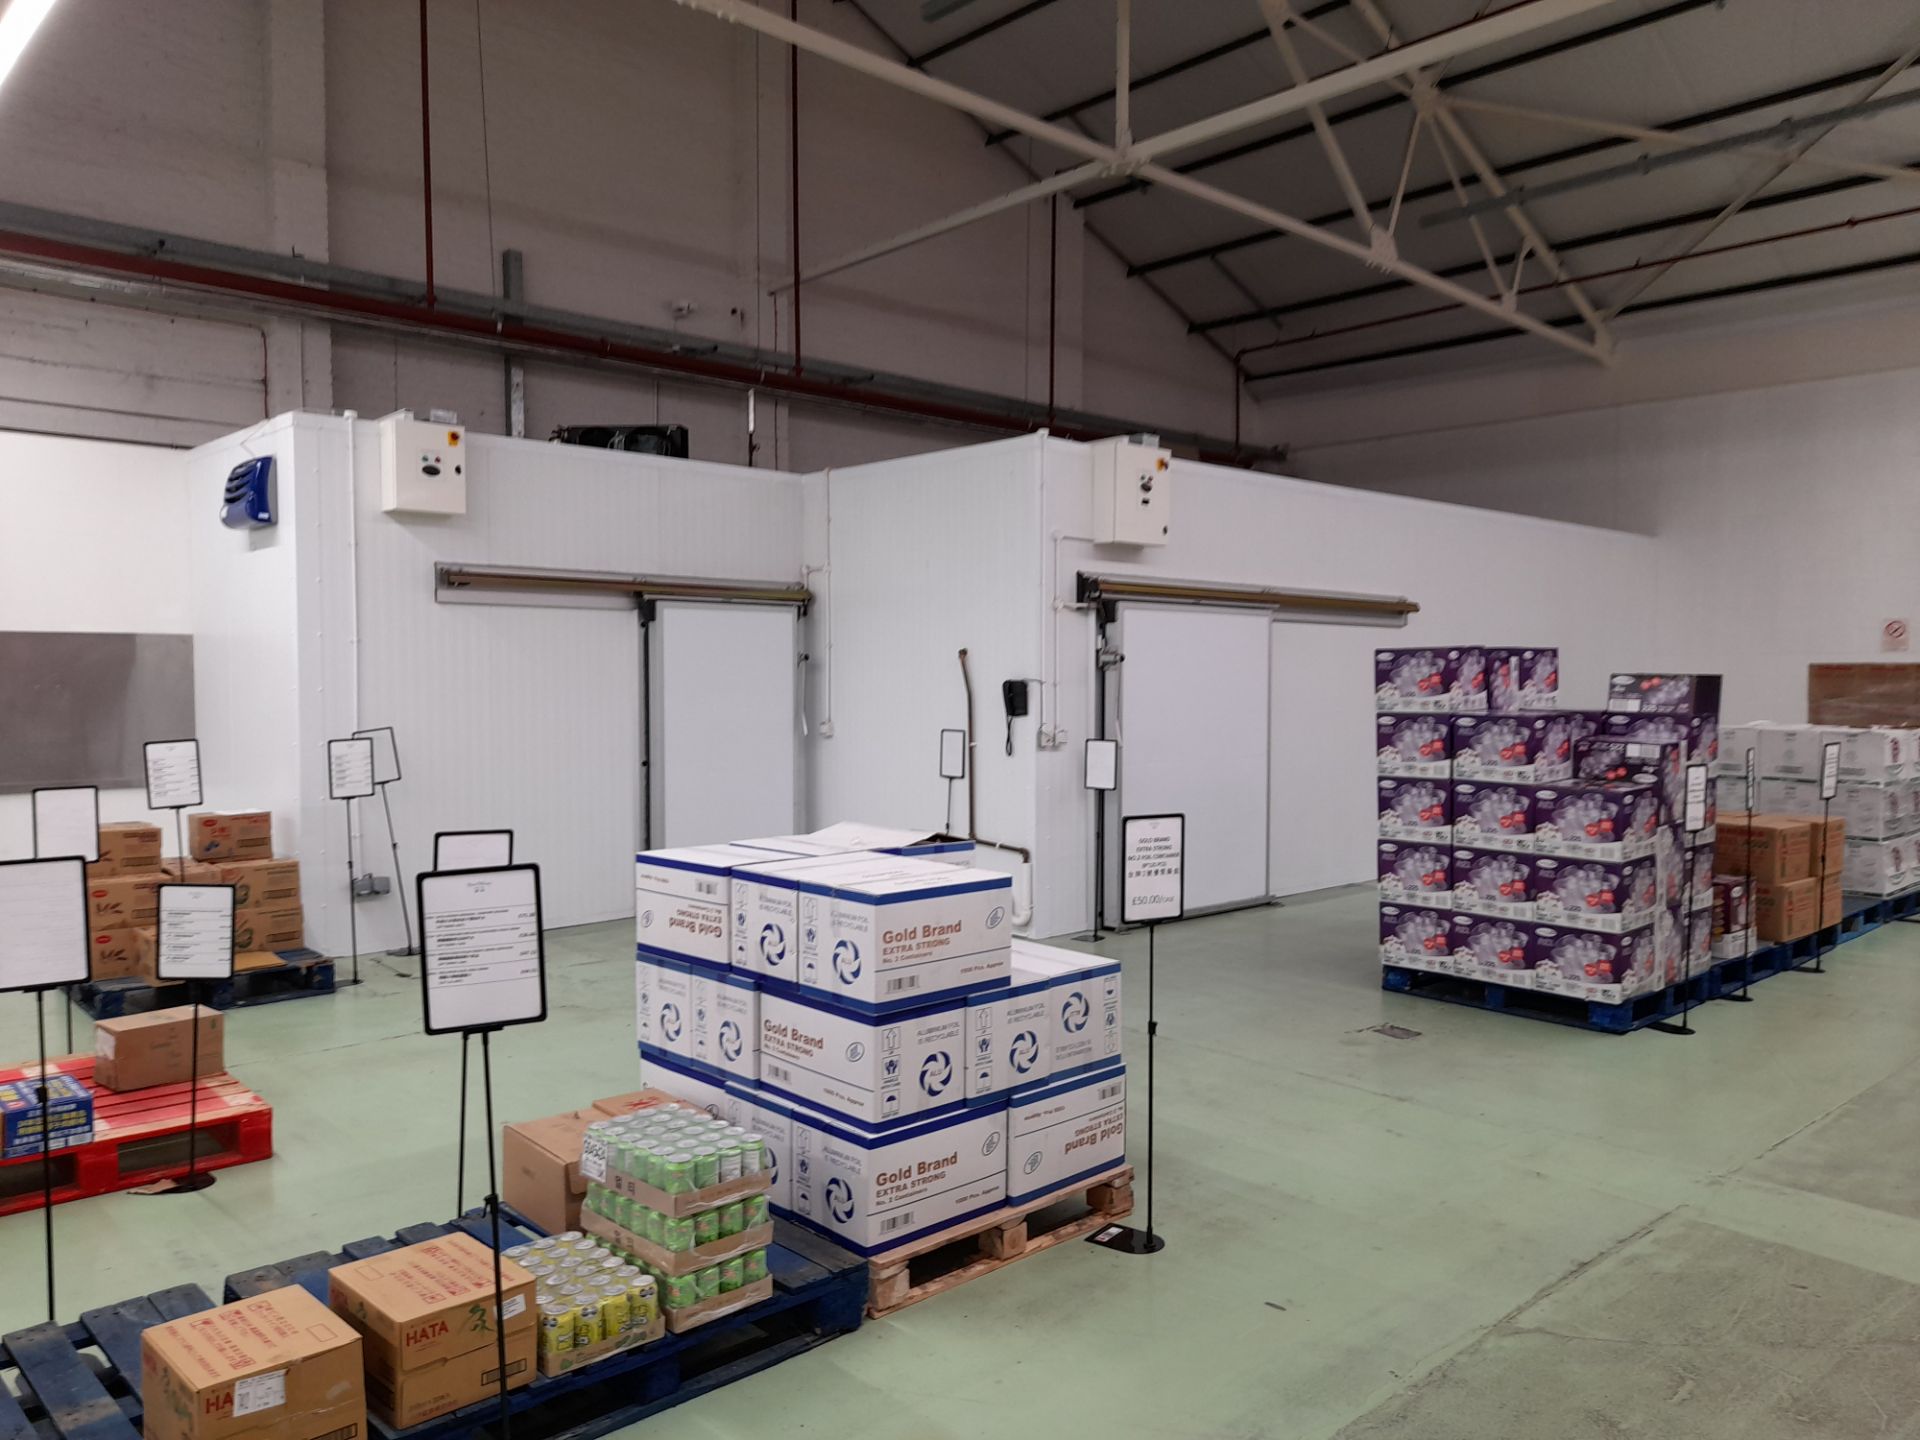 Twin Modular Fabricated Chill Room – Room 6 approx. 8m x 4.5m with 1 x Russell 3 fan chiller, Room 7